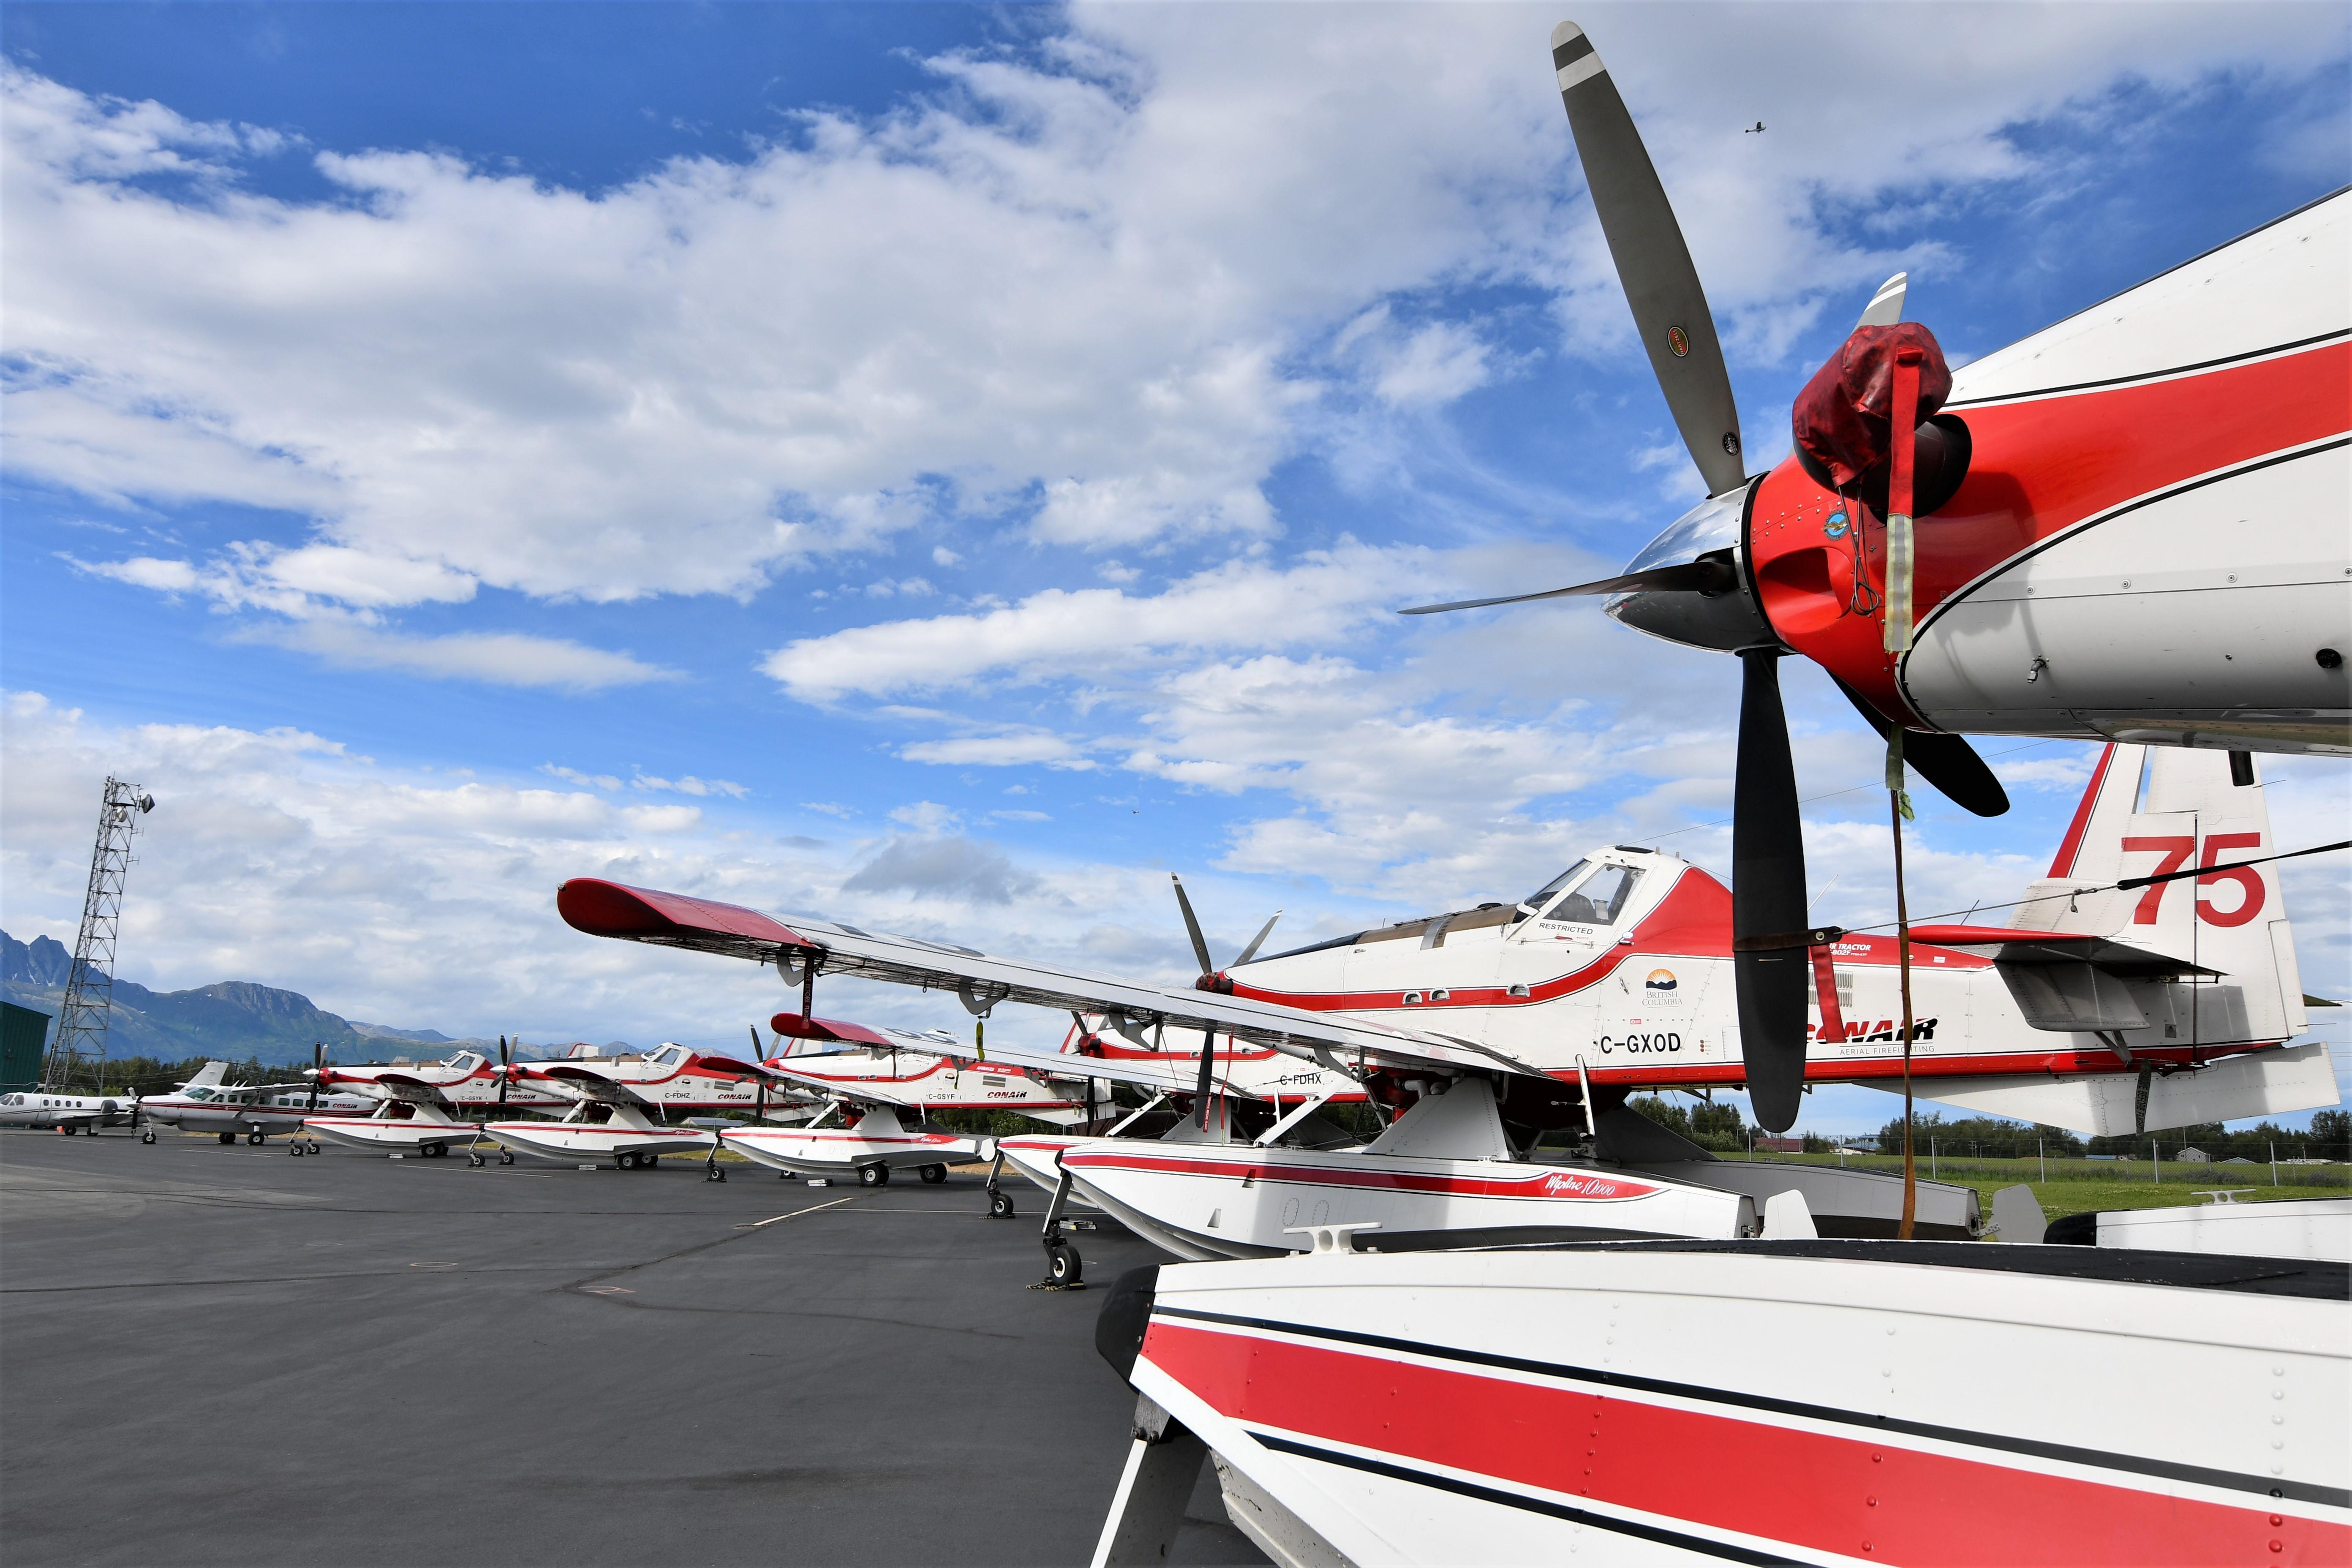 Several Fire Boss airplanes are parked on the pavement at the Palmer airport.